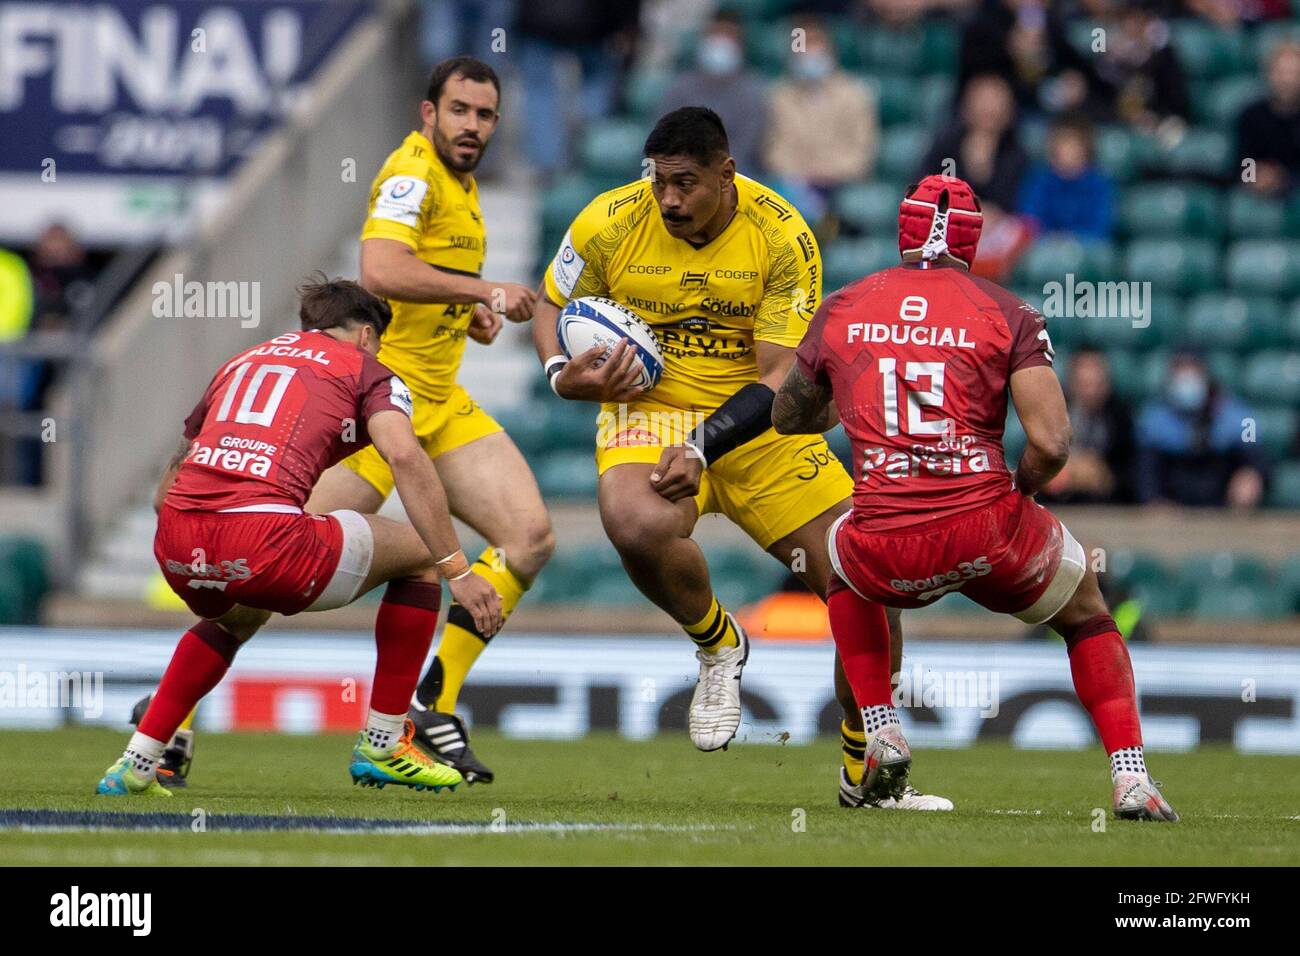 Twickenham London Uk 22nd May 21 European Rugby Champions Cup Final La Rochelle Versus Toulouse Will Skelton Of La Rochelle Powers Towards Romain Ntamack And Pita Ahki Of Toulouse Credit Action Plus